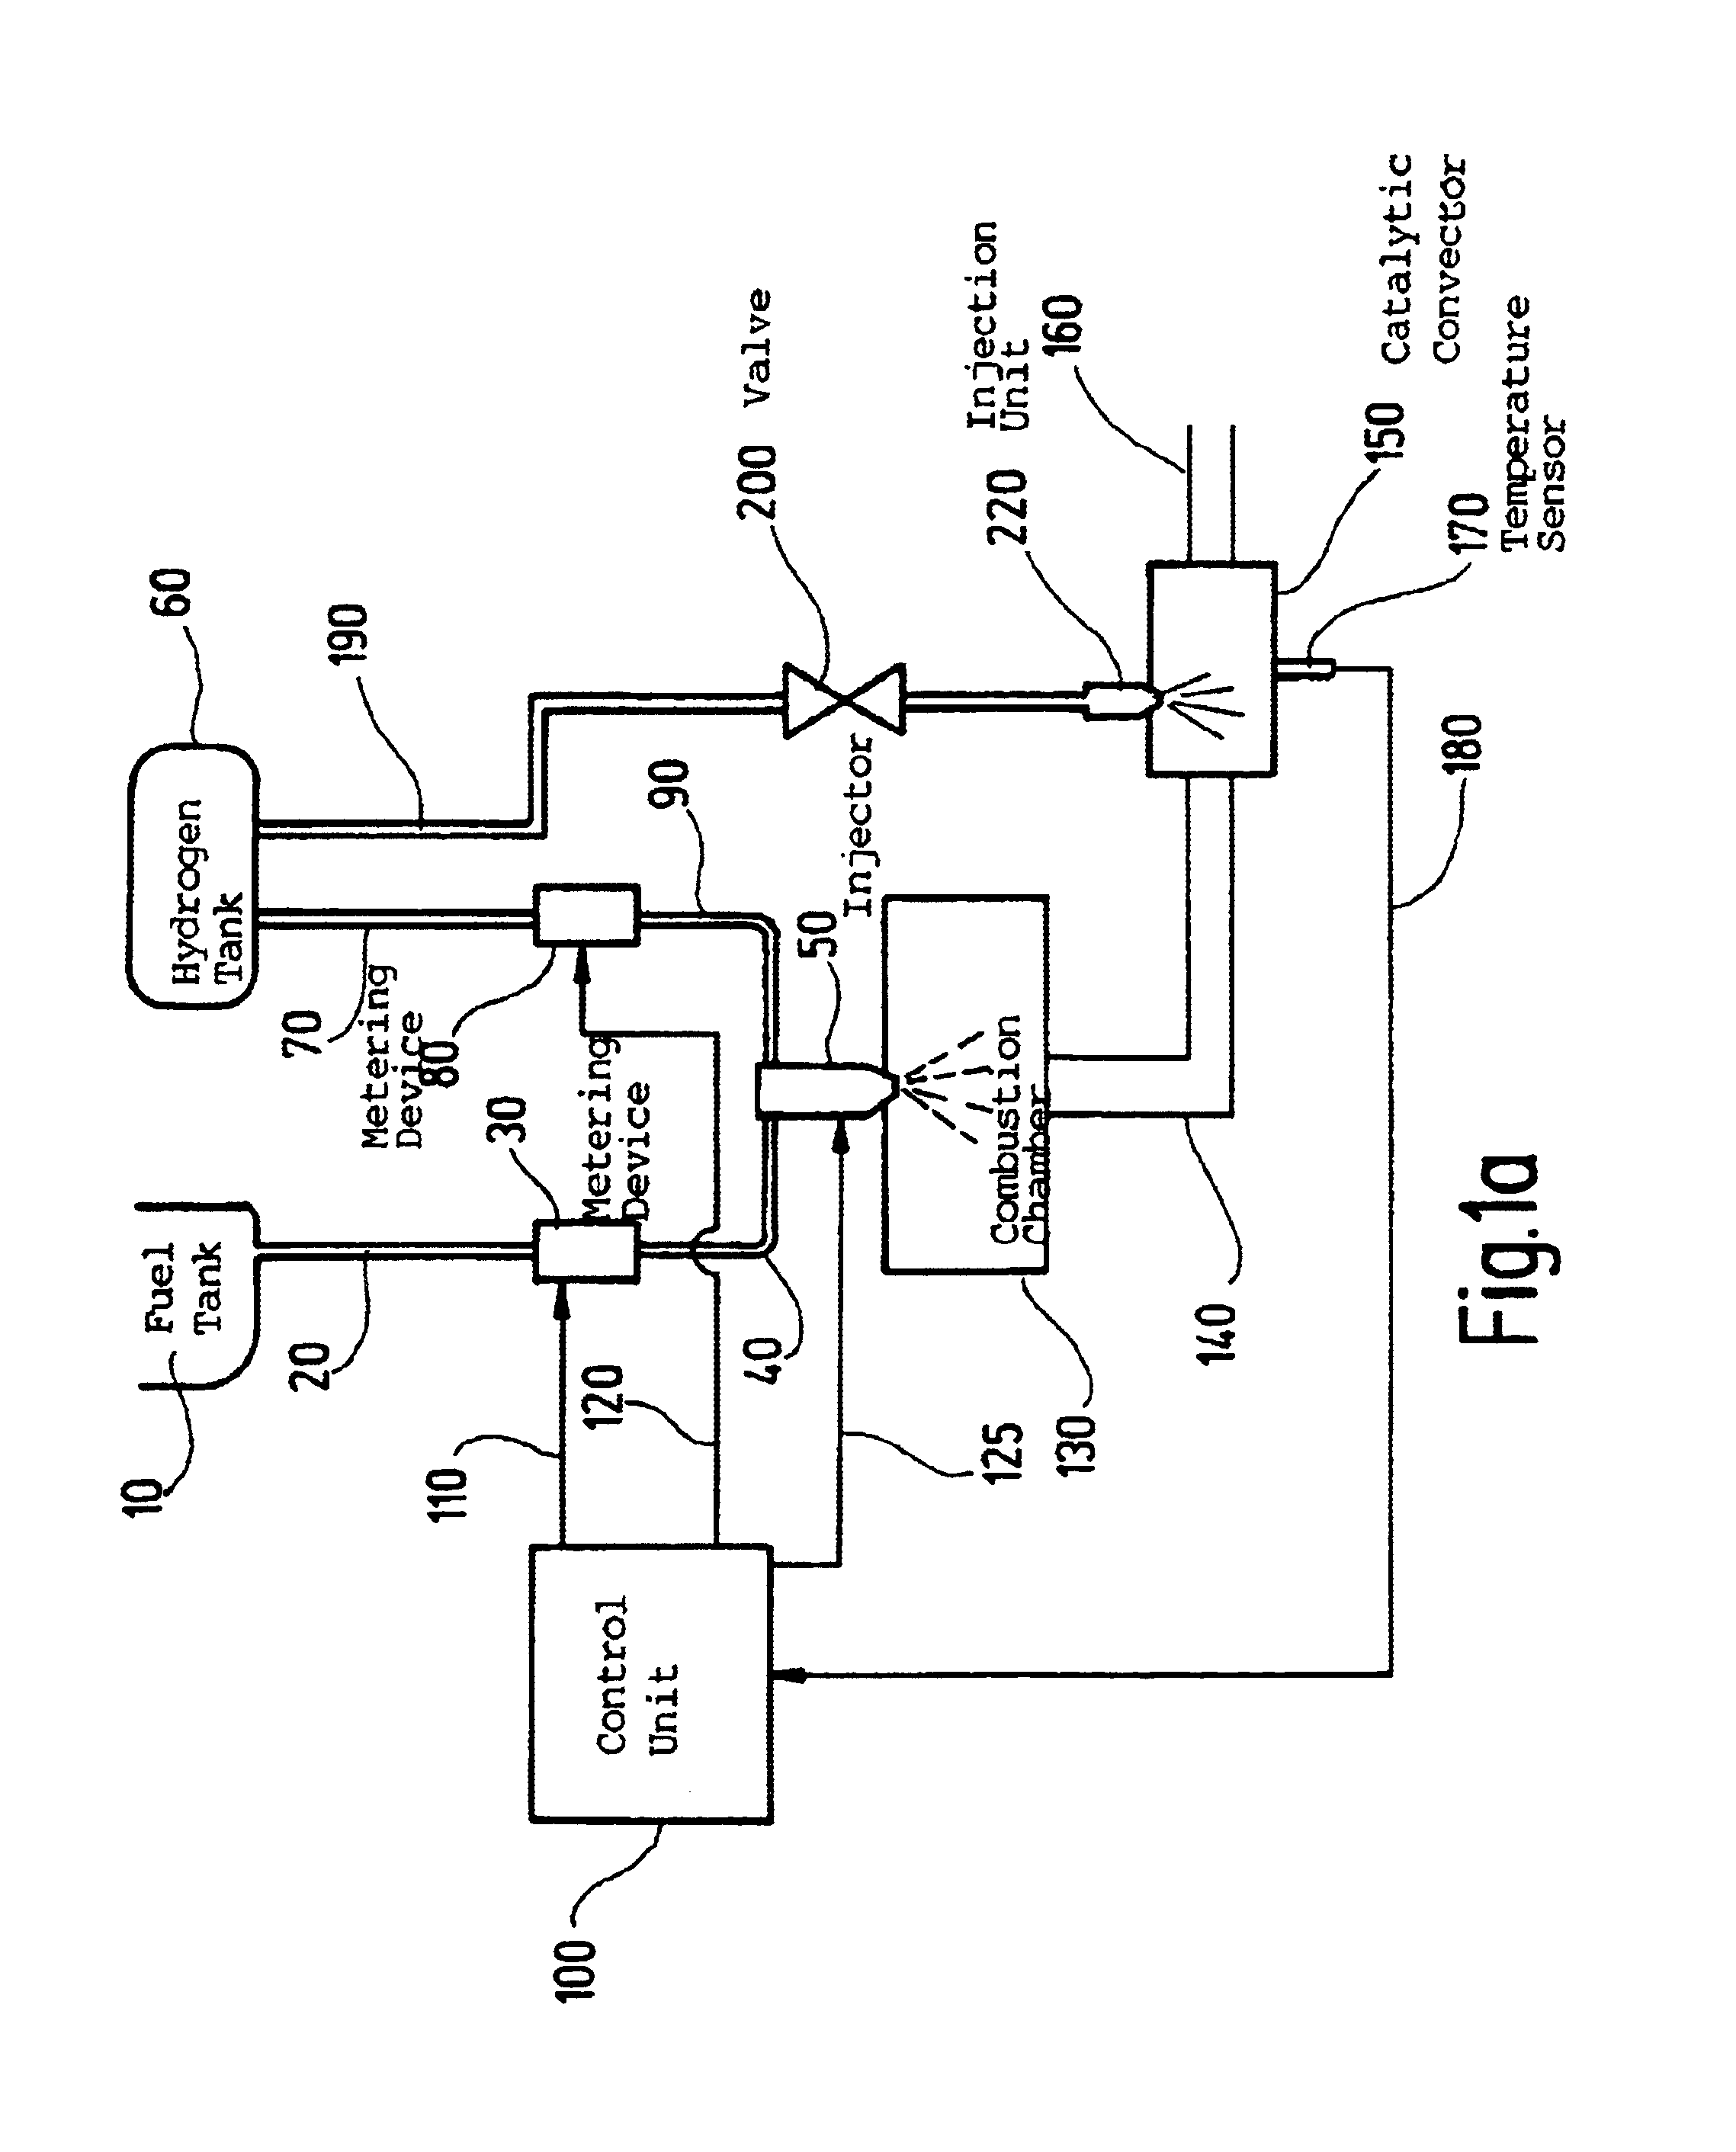 Method and device for operating an internal combustion engine using a plurality of fuels